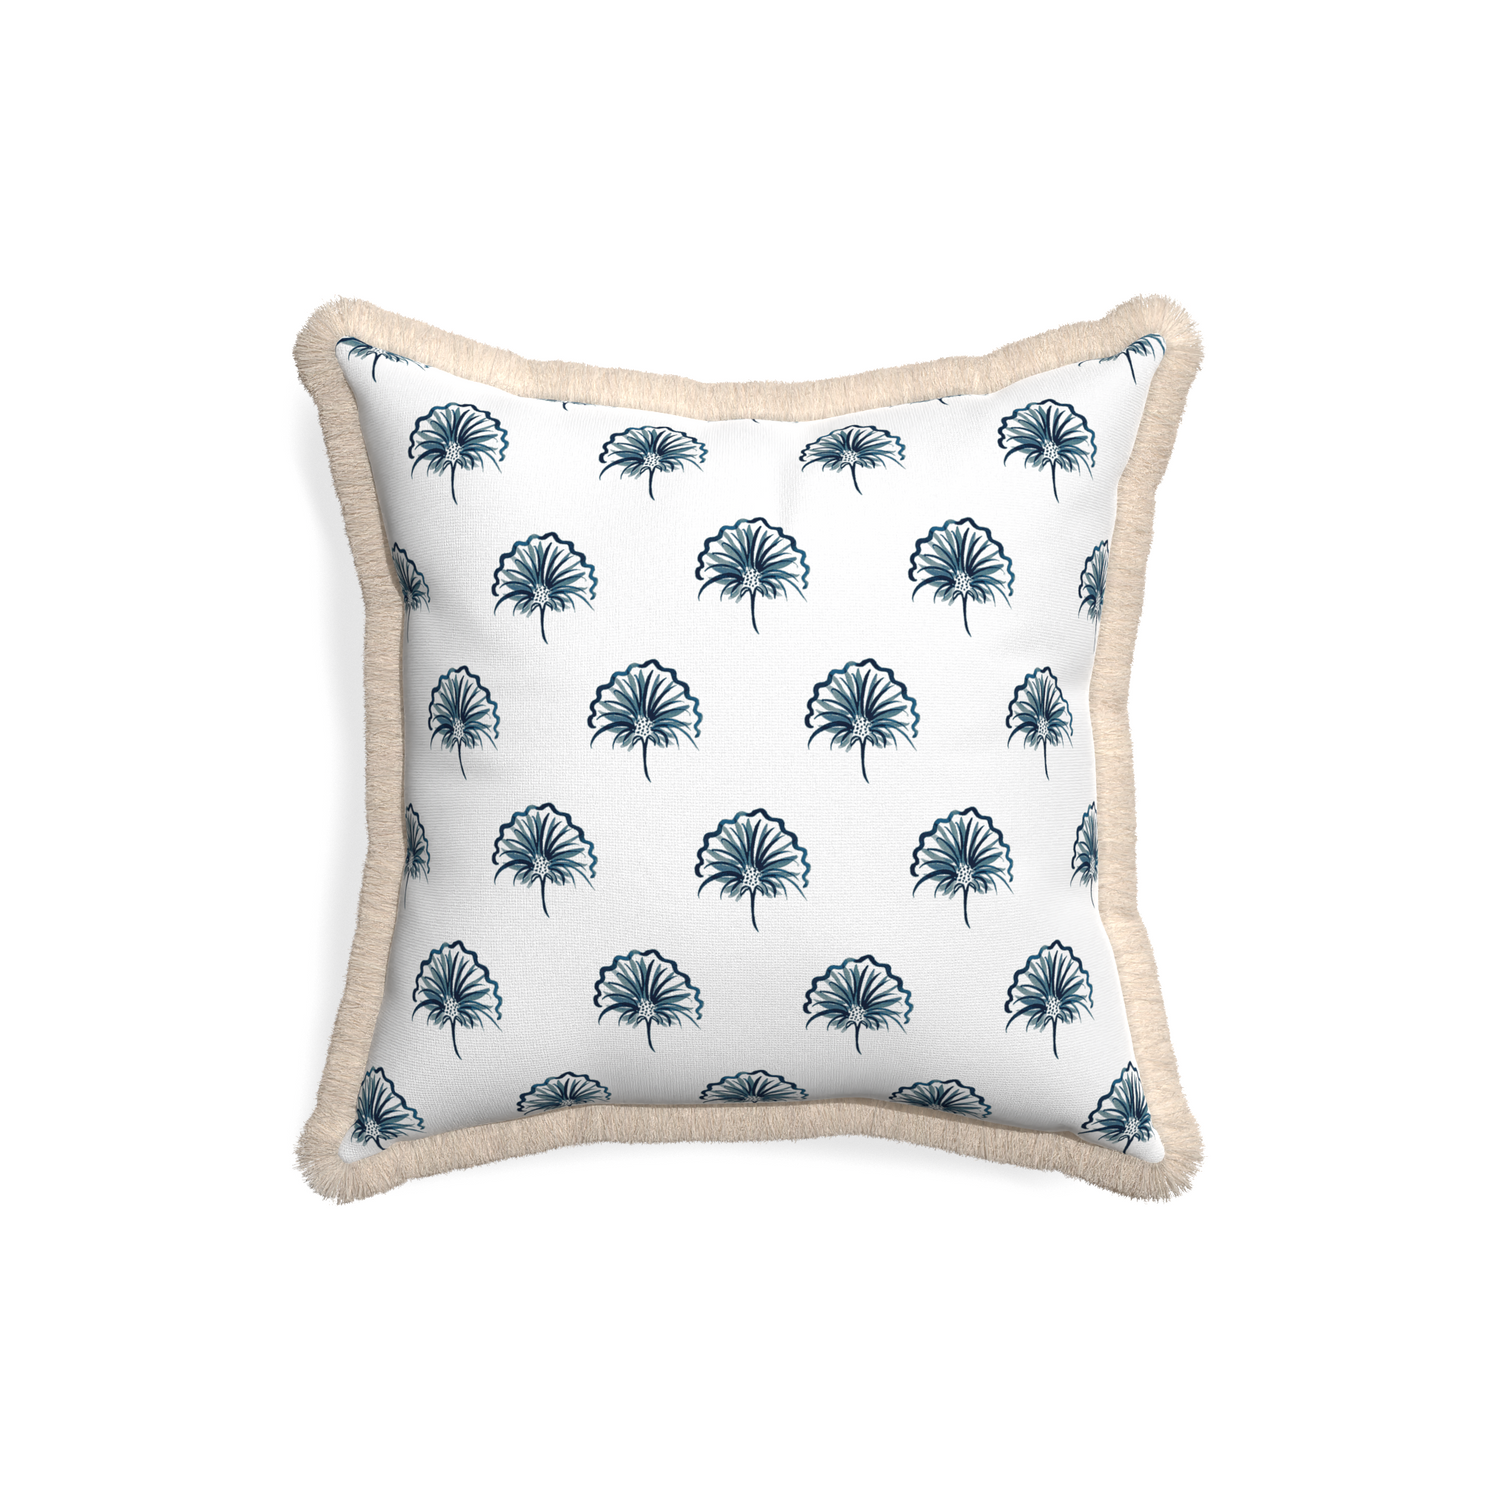 18-square penelope midnight custom floral navypillow with cream fringe on white background